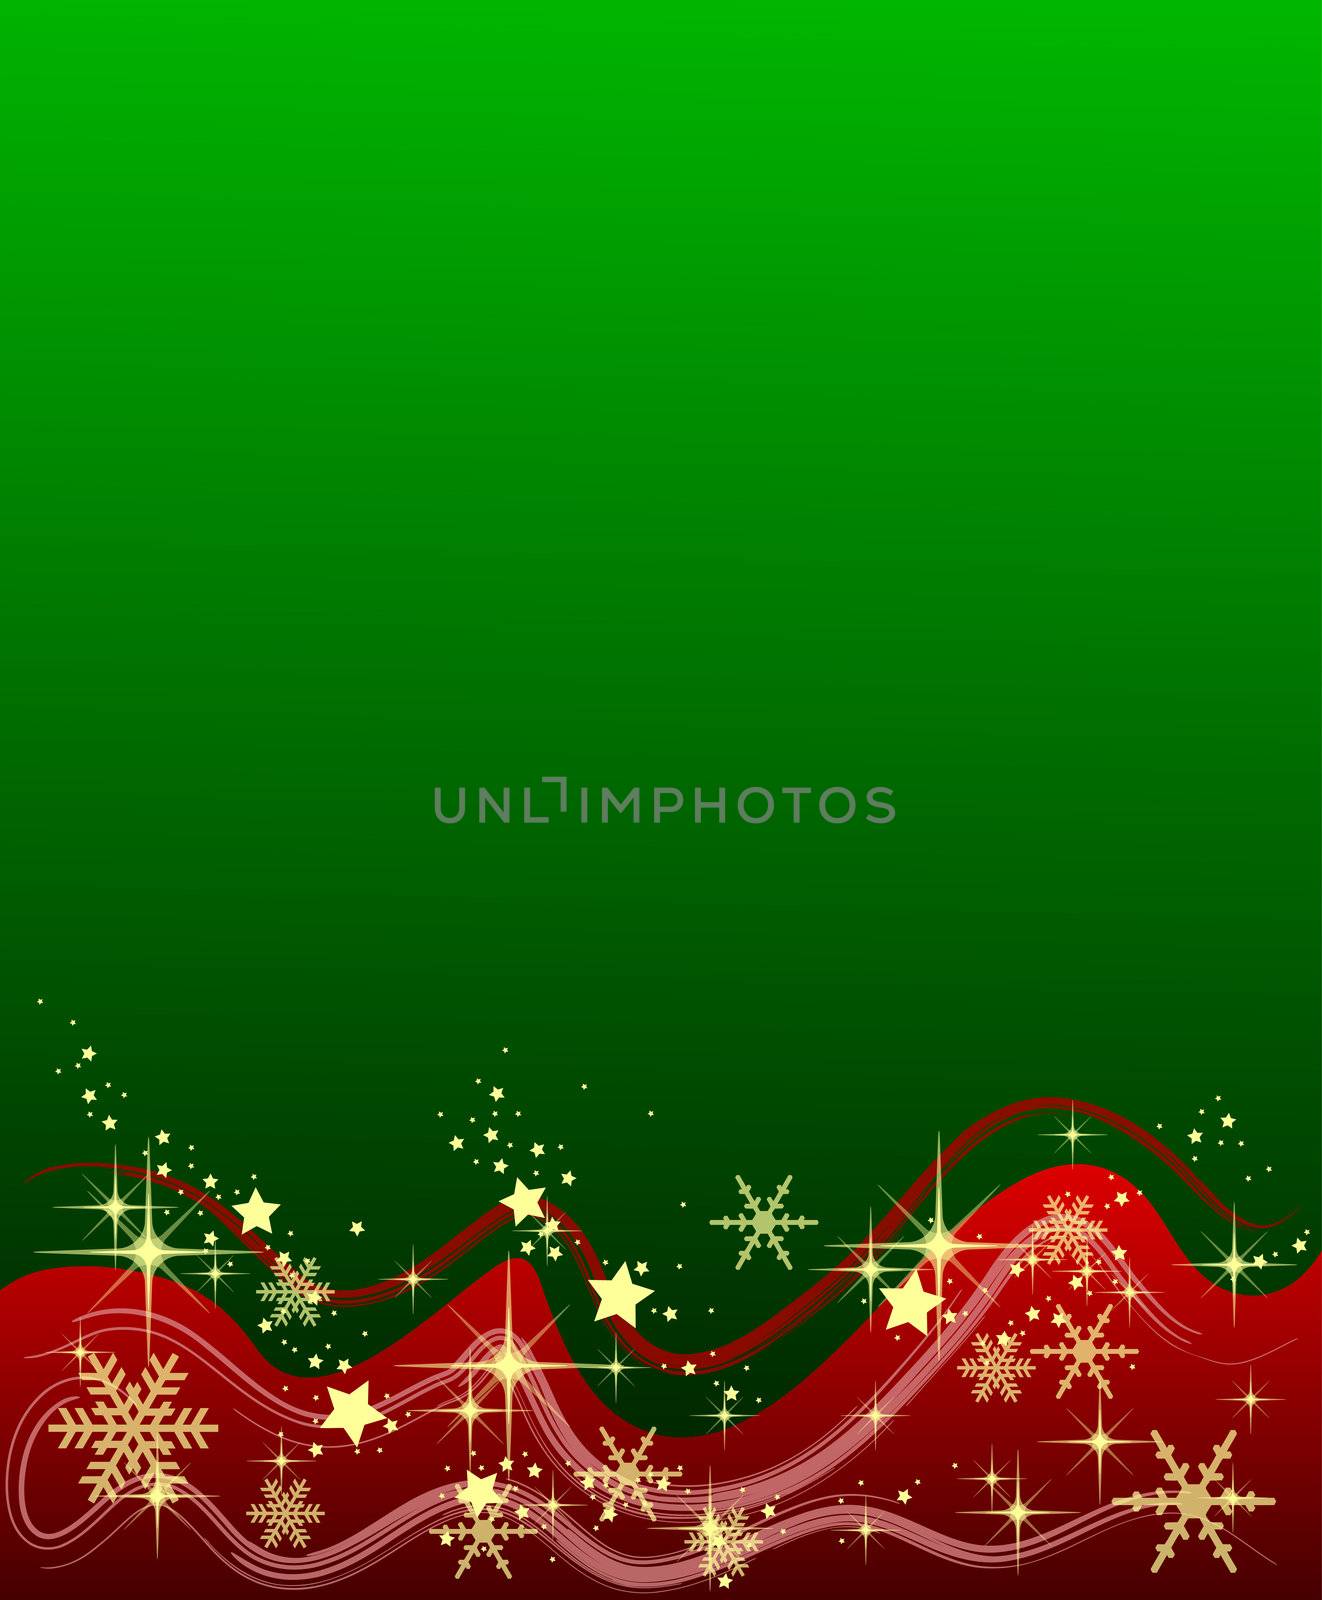 Illustration of a green background with stars and snowflakes by peromarketing